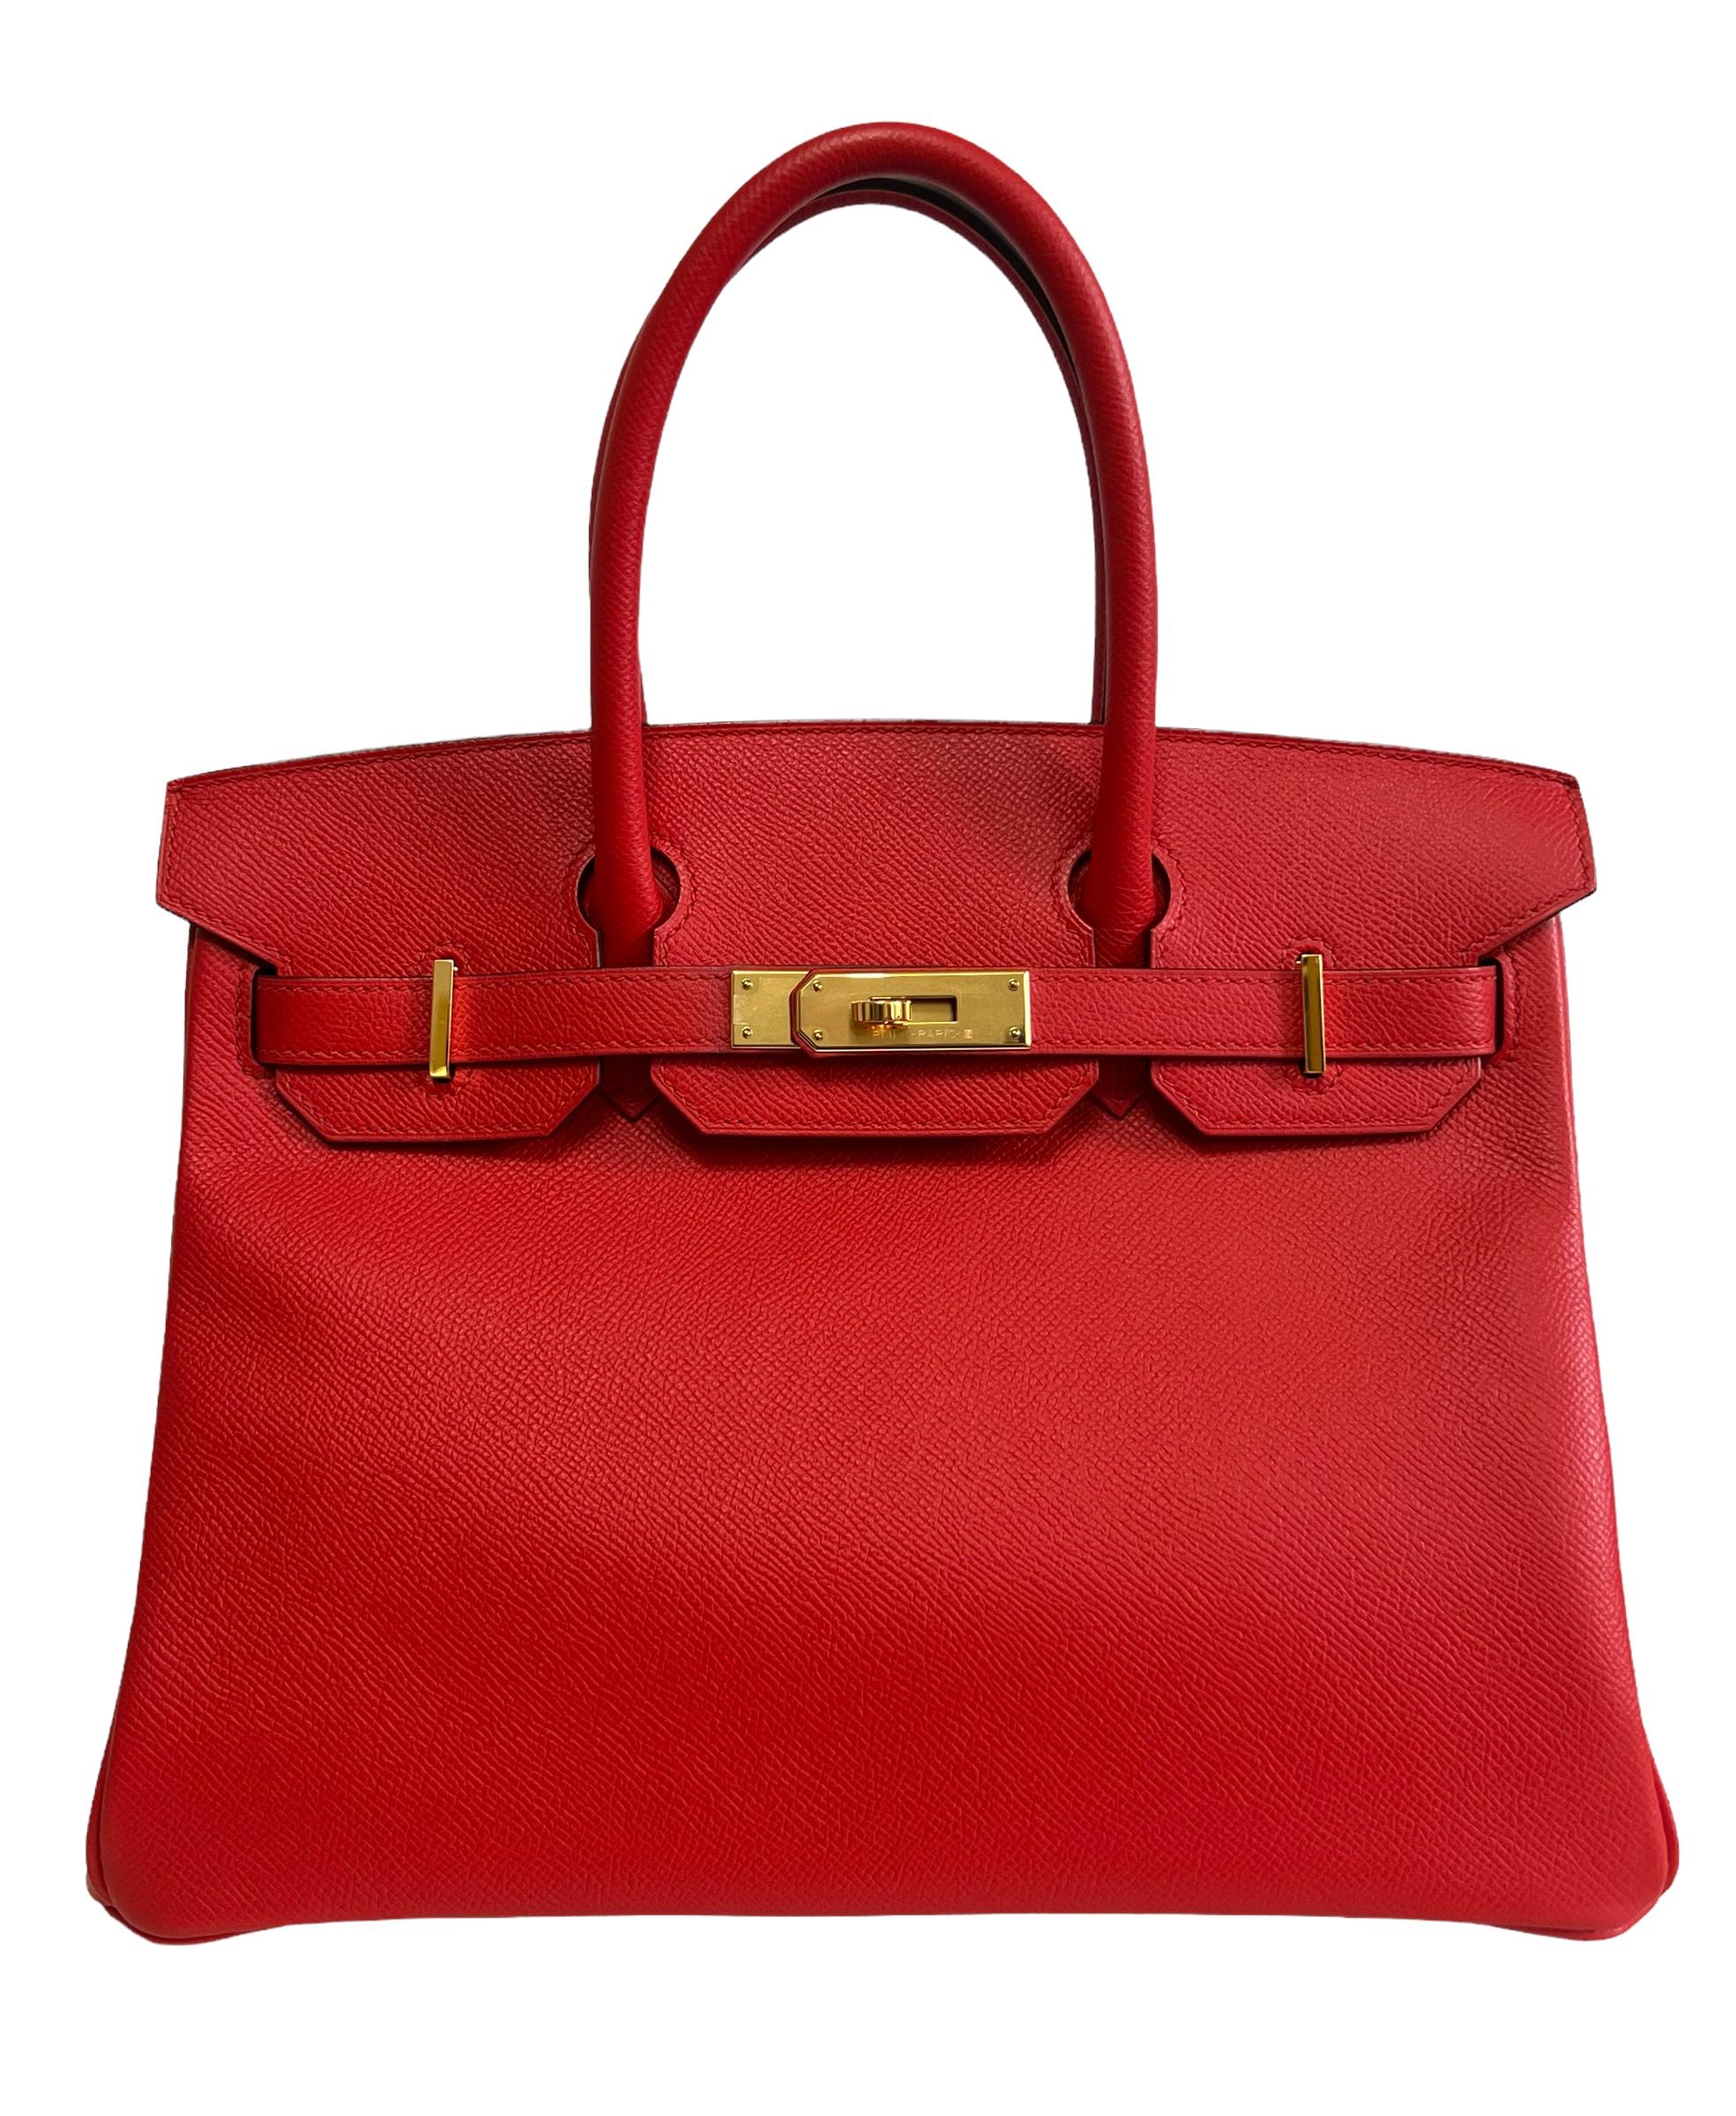 Stunning Hermes Birkin 30 Rouge de Coeur Epsom Leather Gold Hardware. Pristine condition with plastic on hardware. 2019 D Stamp.

Shop with Confidence from Lux Addicts. Authenticity Guaranteed!